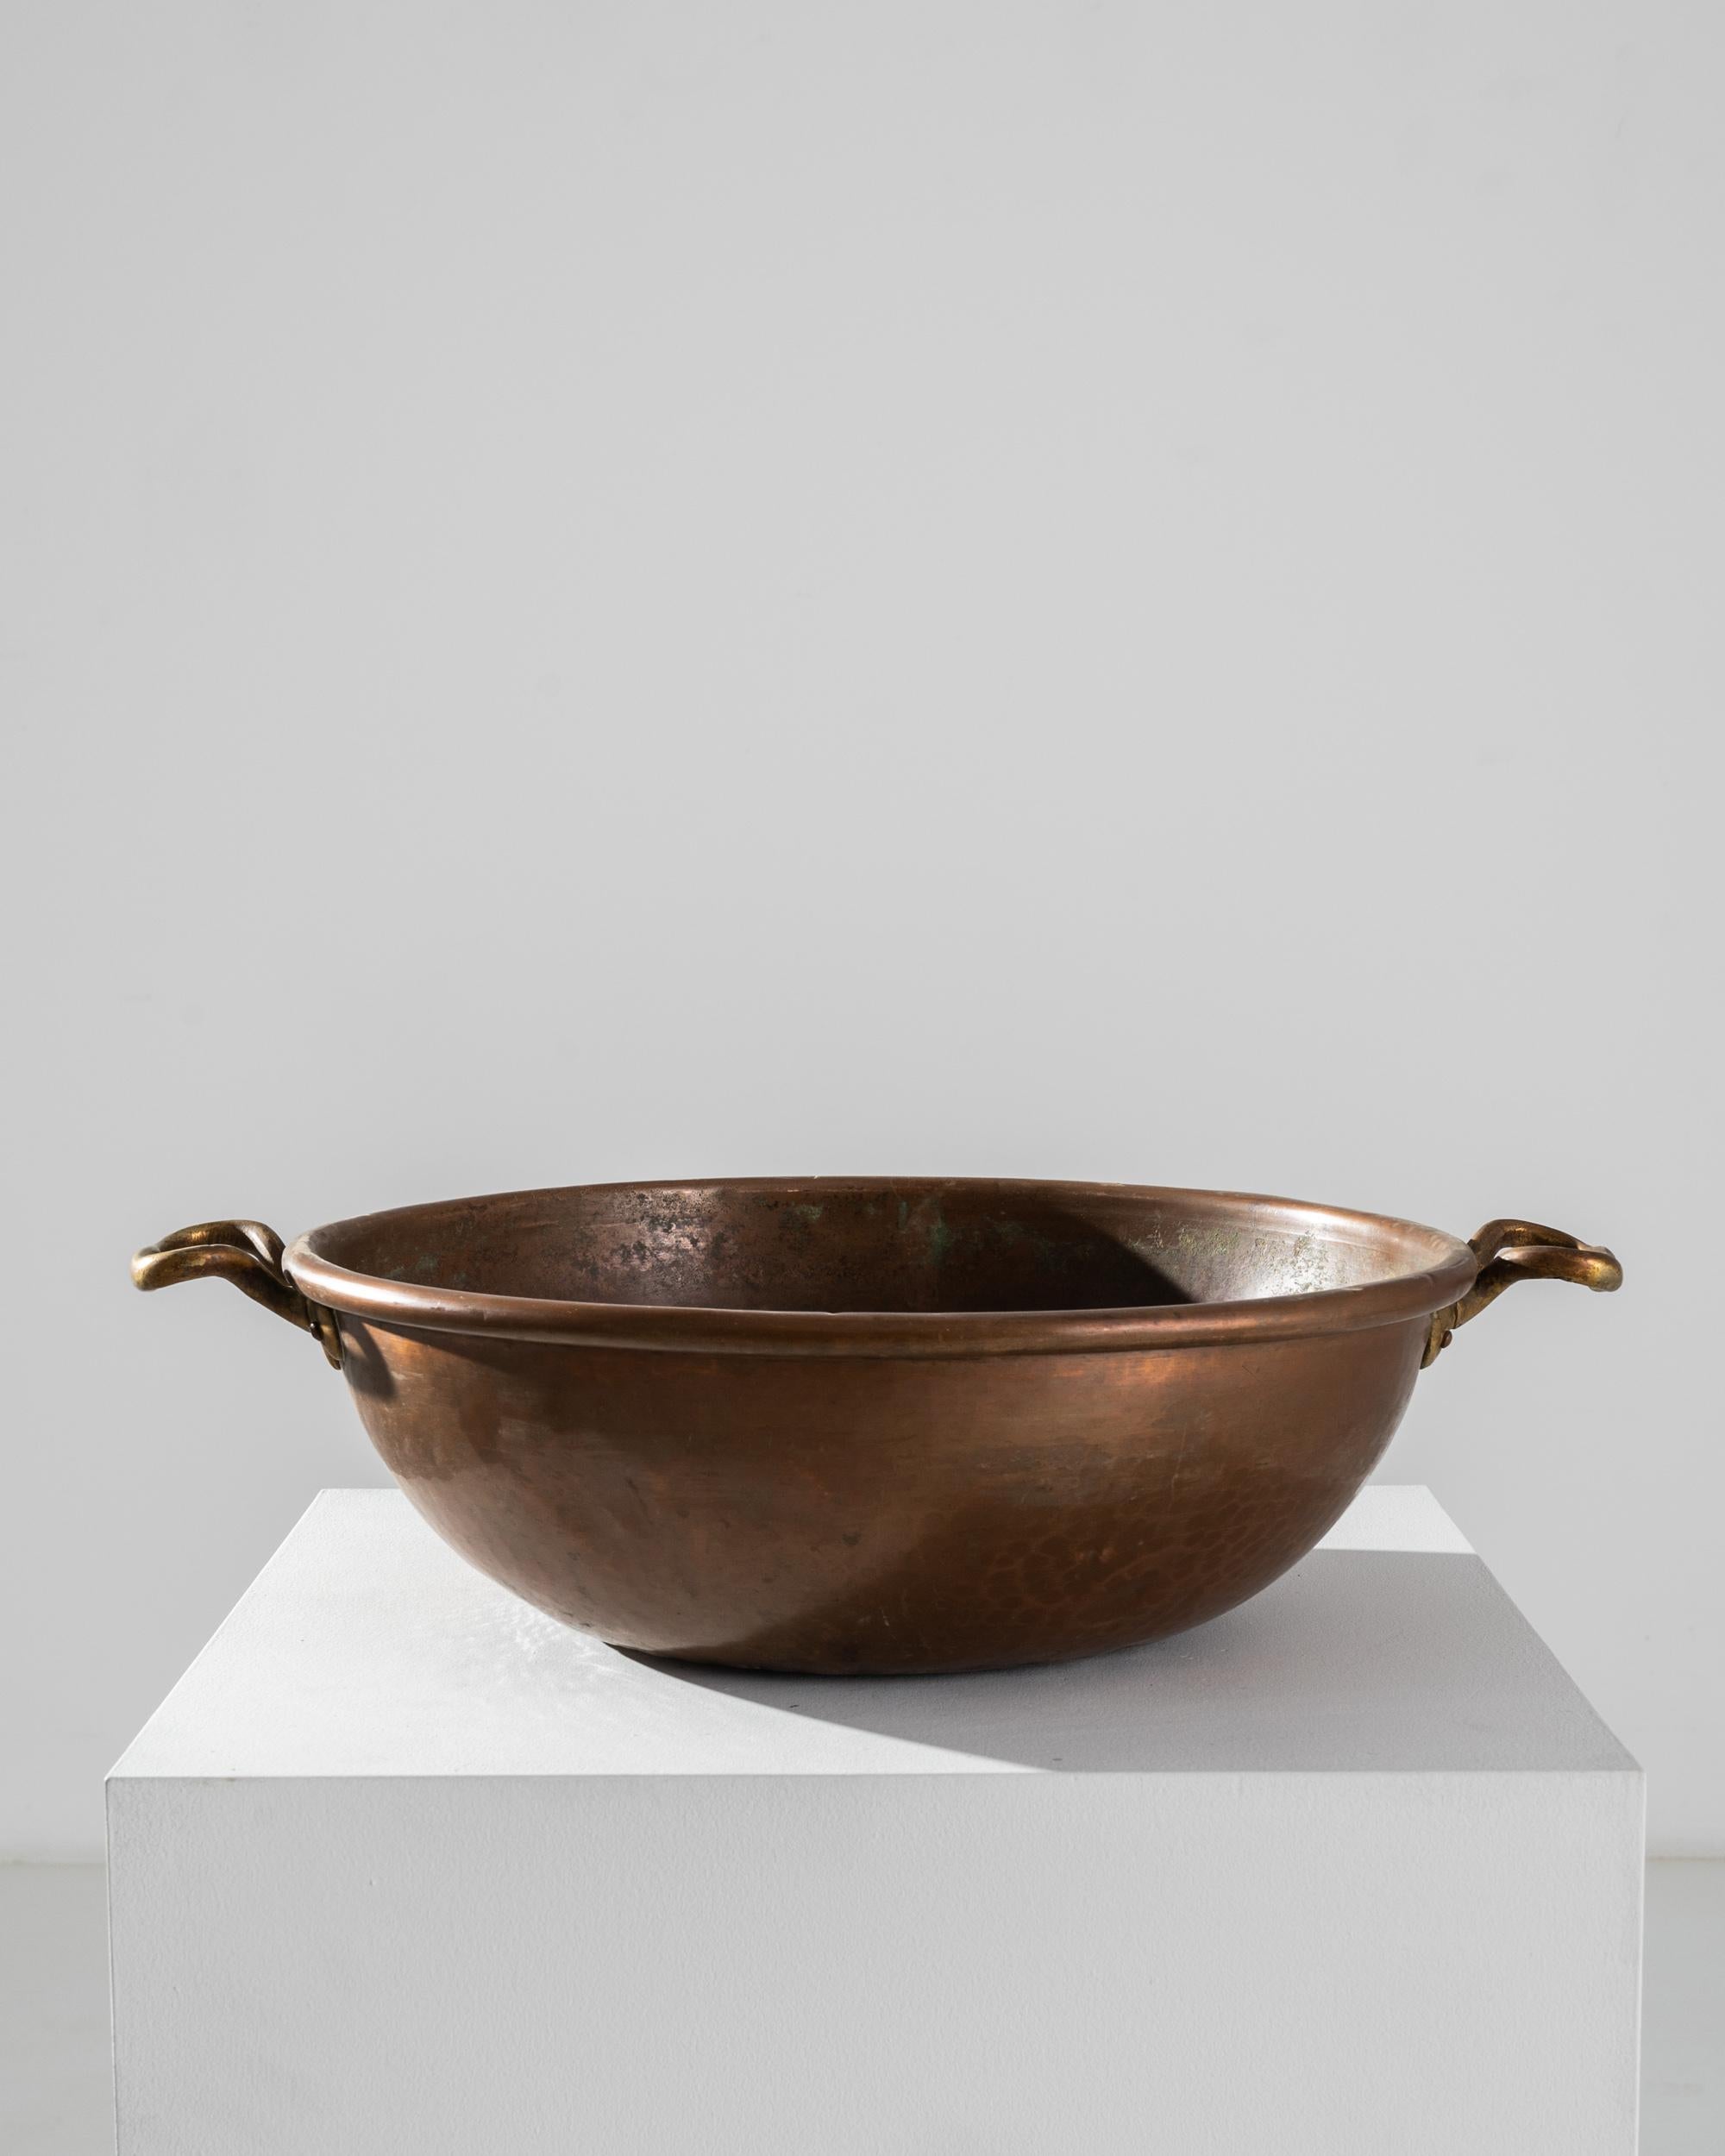 A copper bowl from 19th century Belgium. One of the best metals for conducting heat evenly, copper has been used for sauces, jams and marmalade making for centuries. A round shape, with upraised handles; the rich, rosy tone of the metal brings a